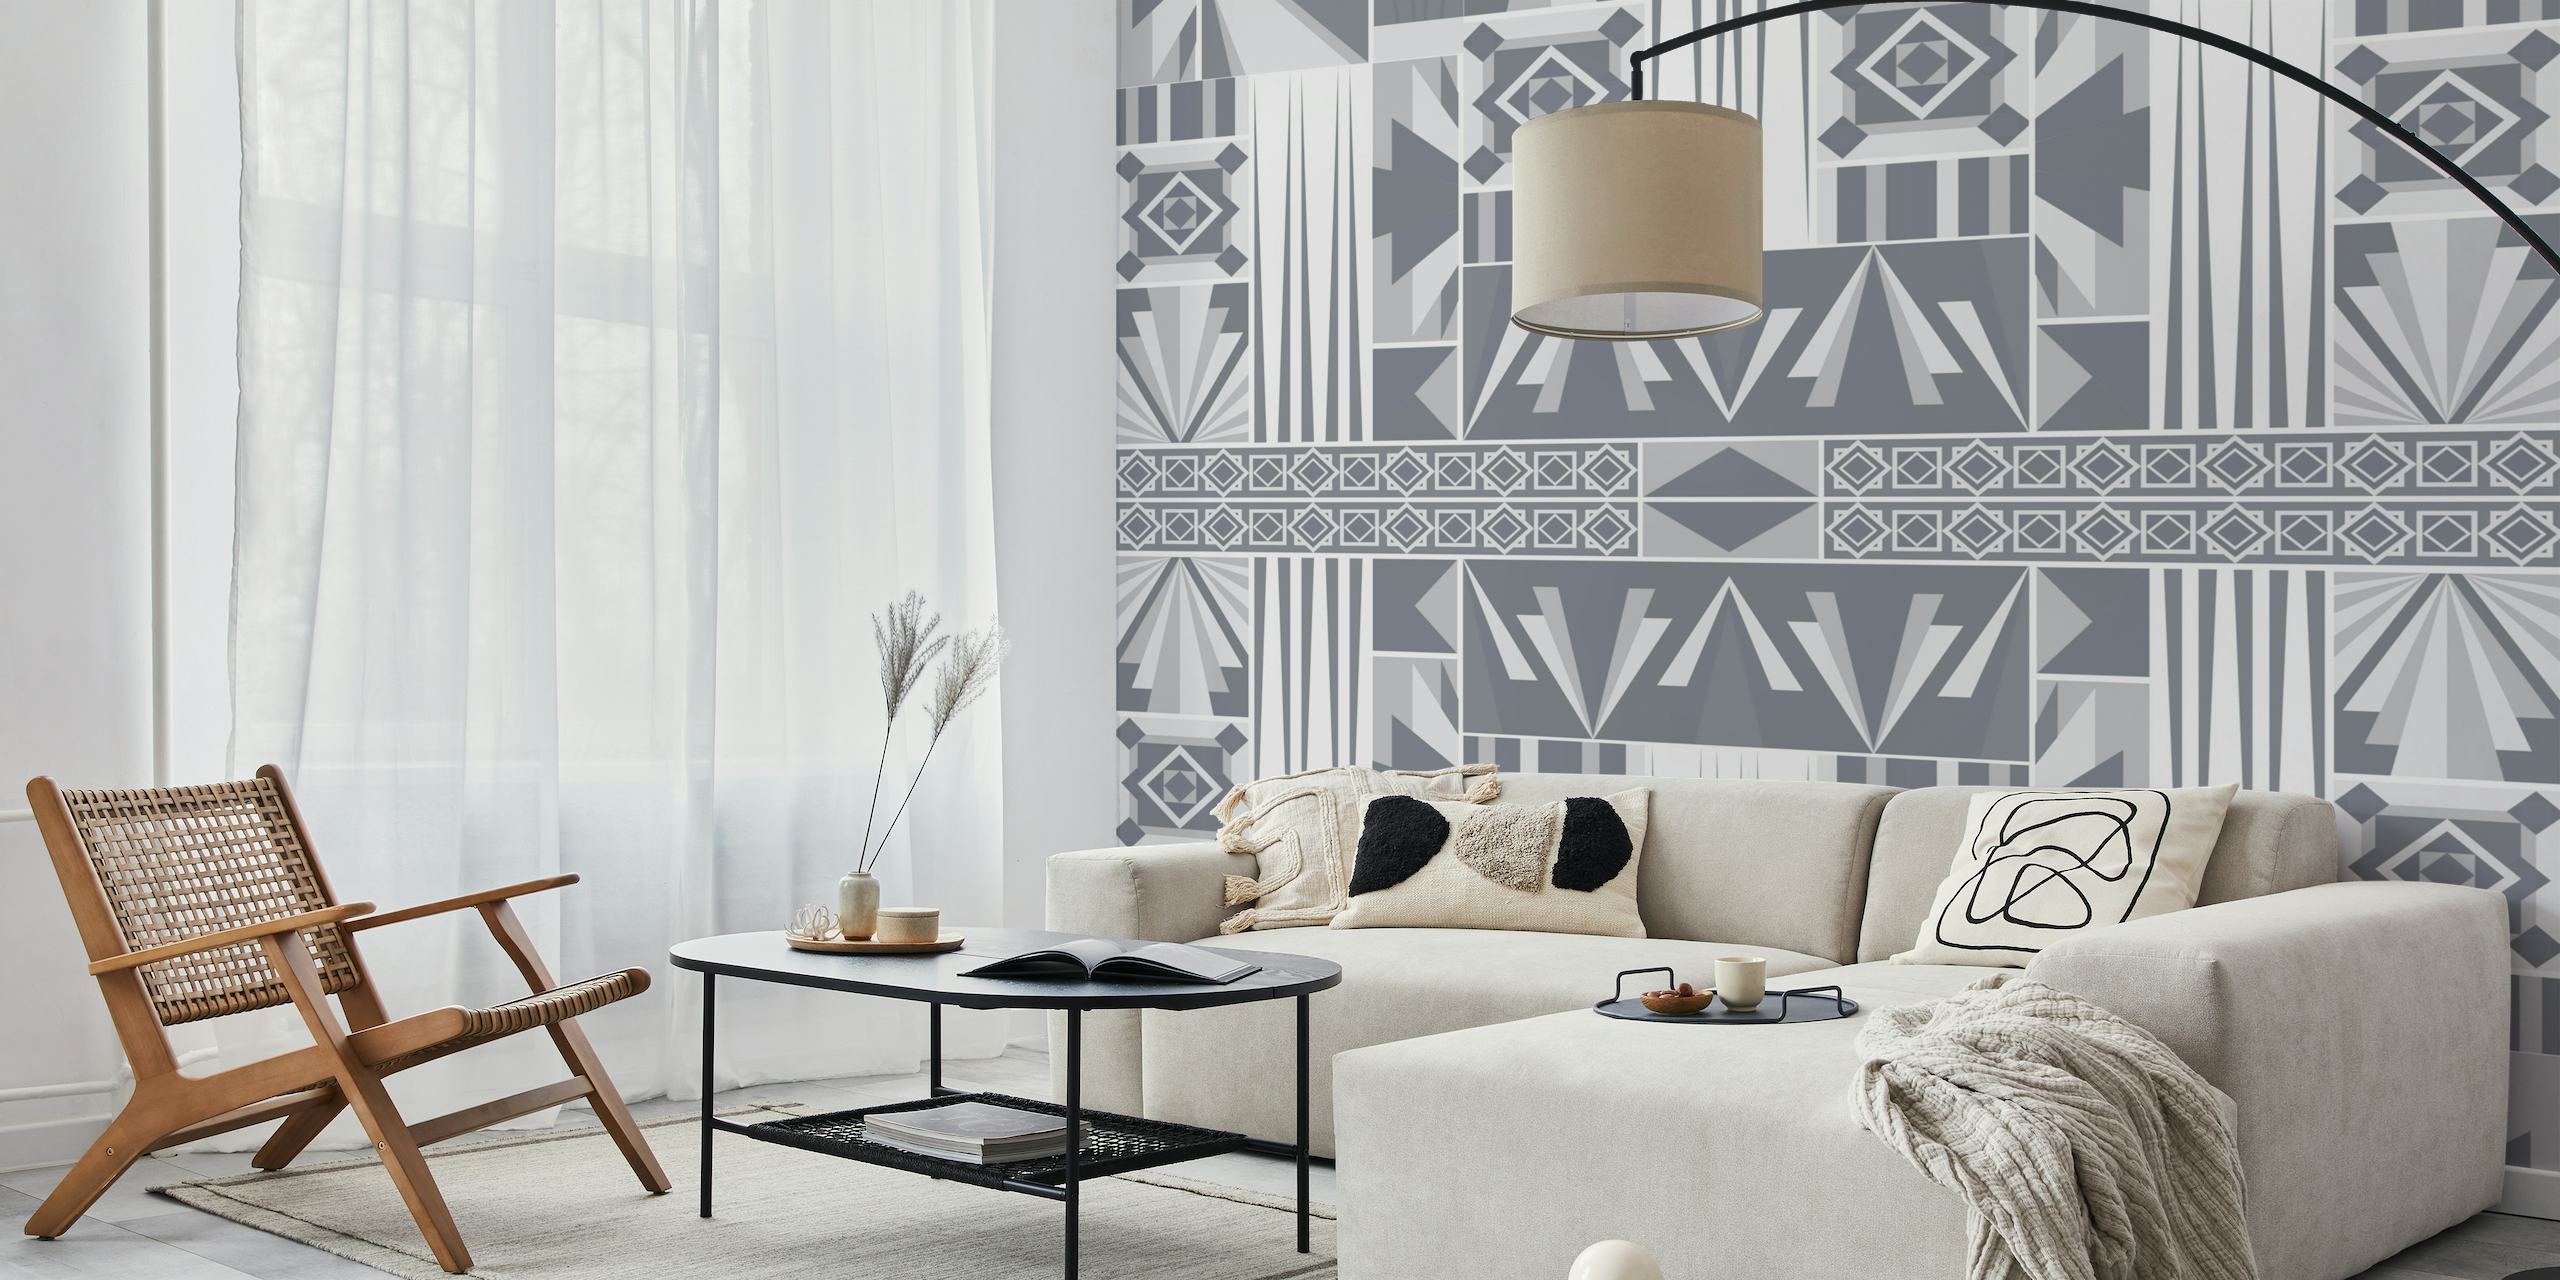 Art Deco style wall mural with geometric shapes in silver and gray